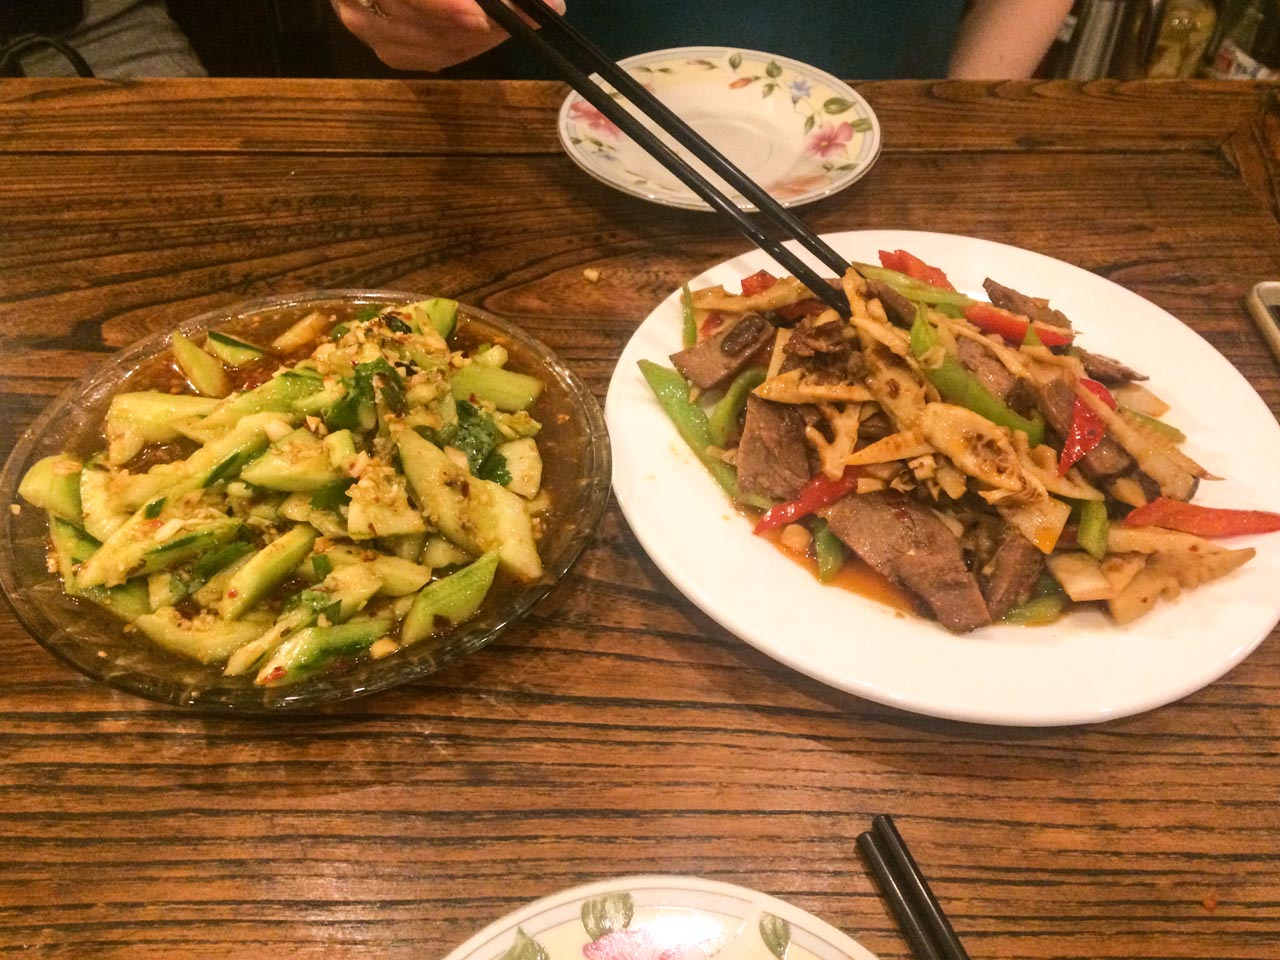 Plates with Chinese cucumber salad and beef with vegetables on a wooden table